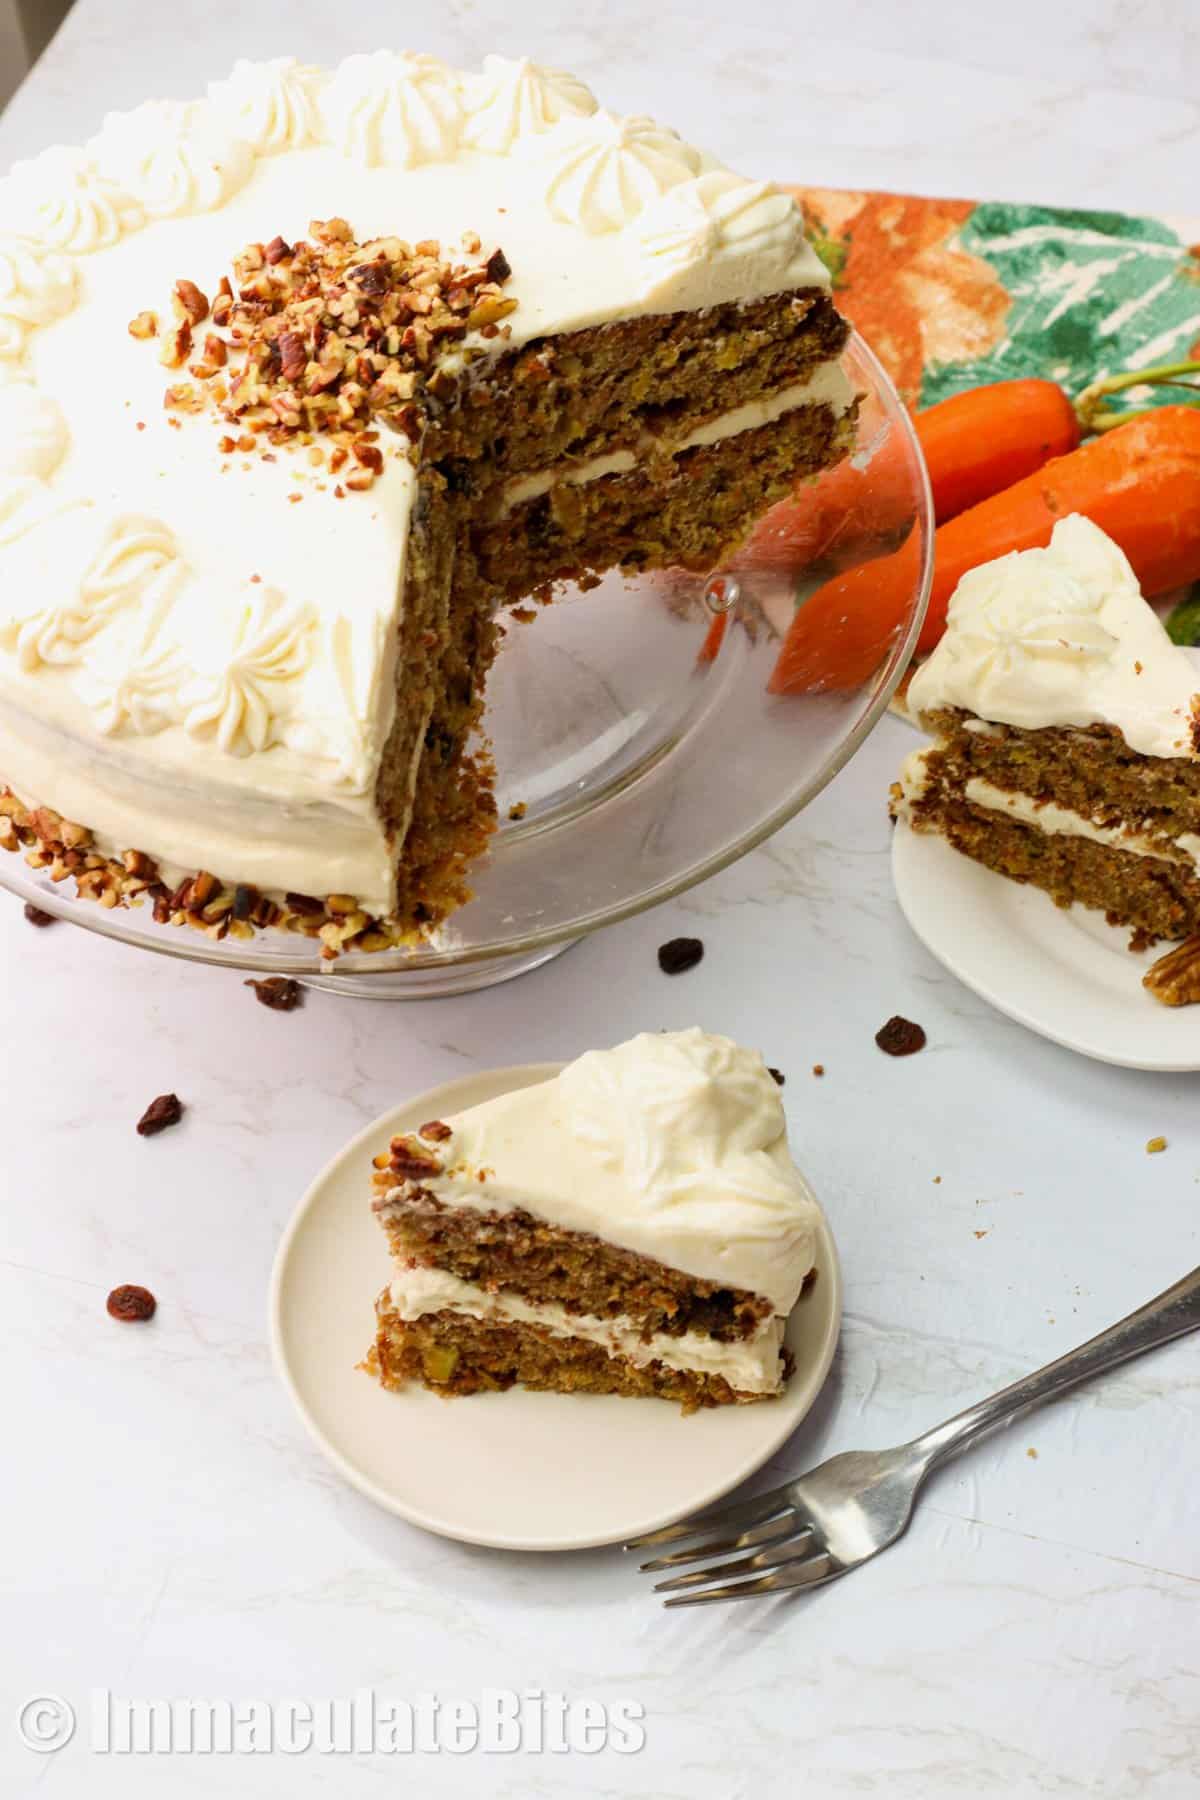 Pineapple Carrot Cake sliced with fresh carrots in the background